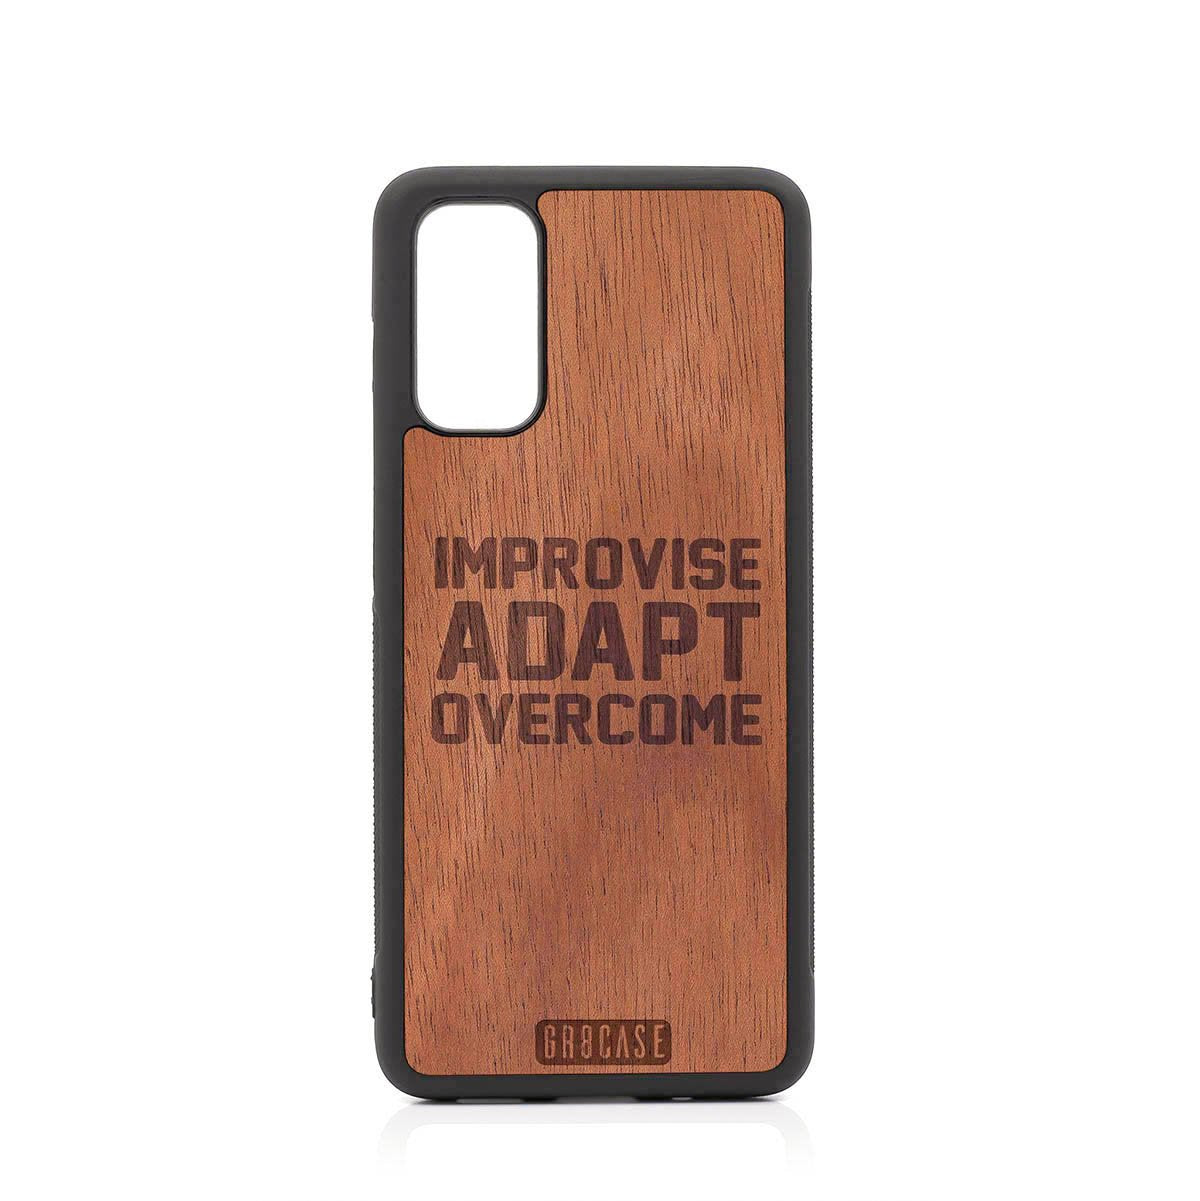 Improvise Adapt Overcome Design Wood Case For Samsung Galaxy S20 FE 5G